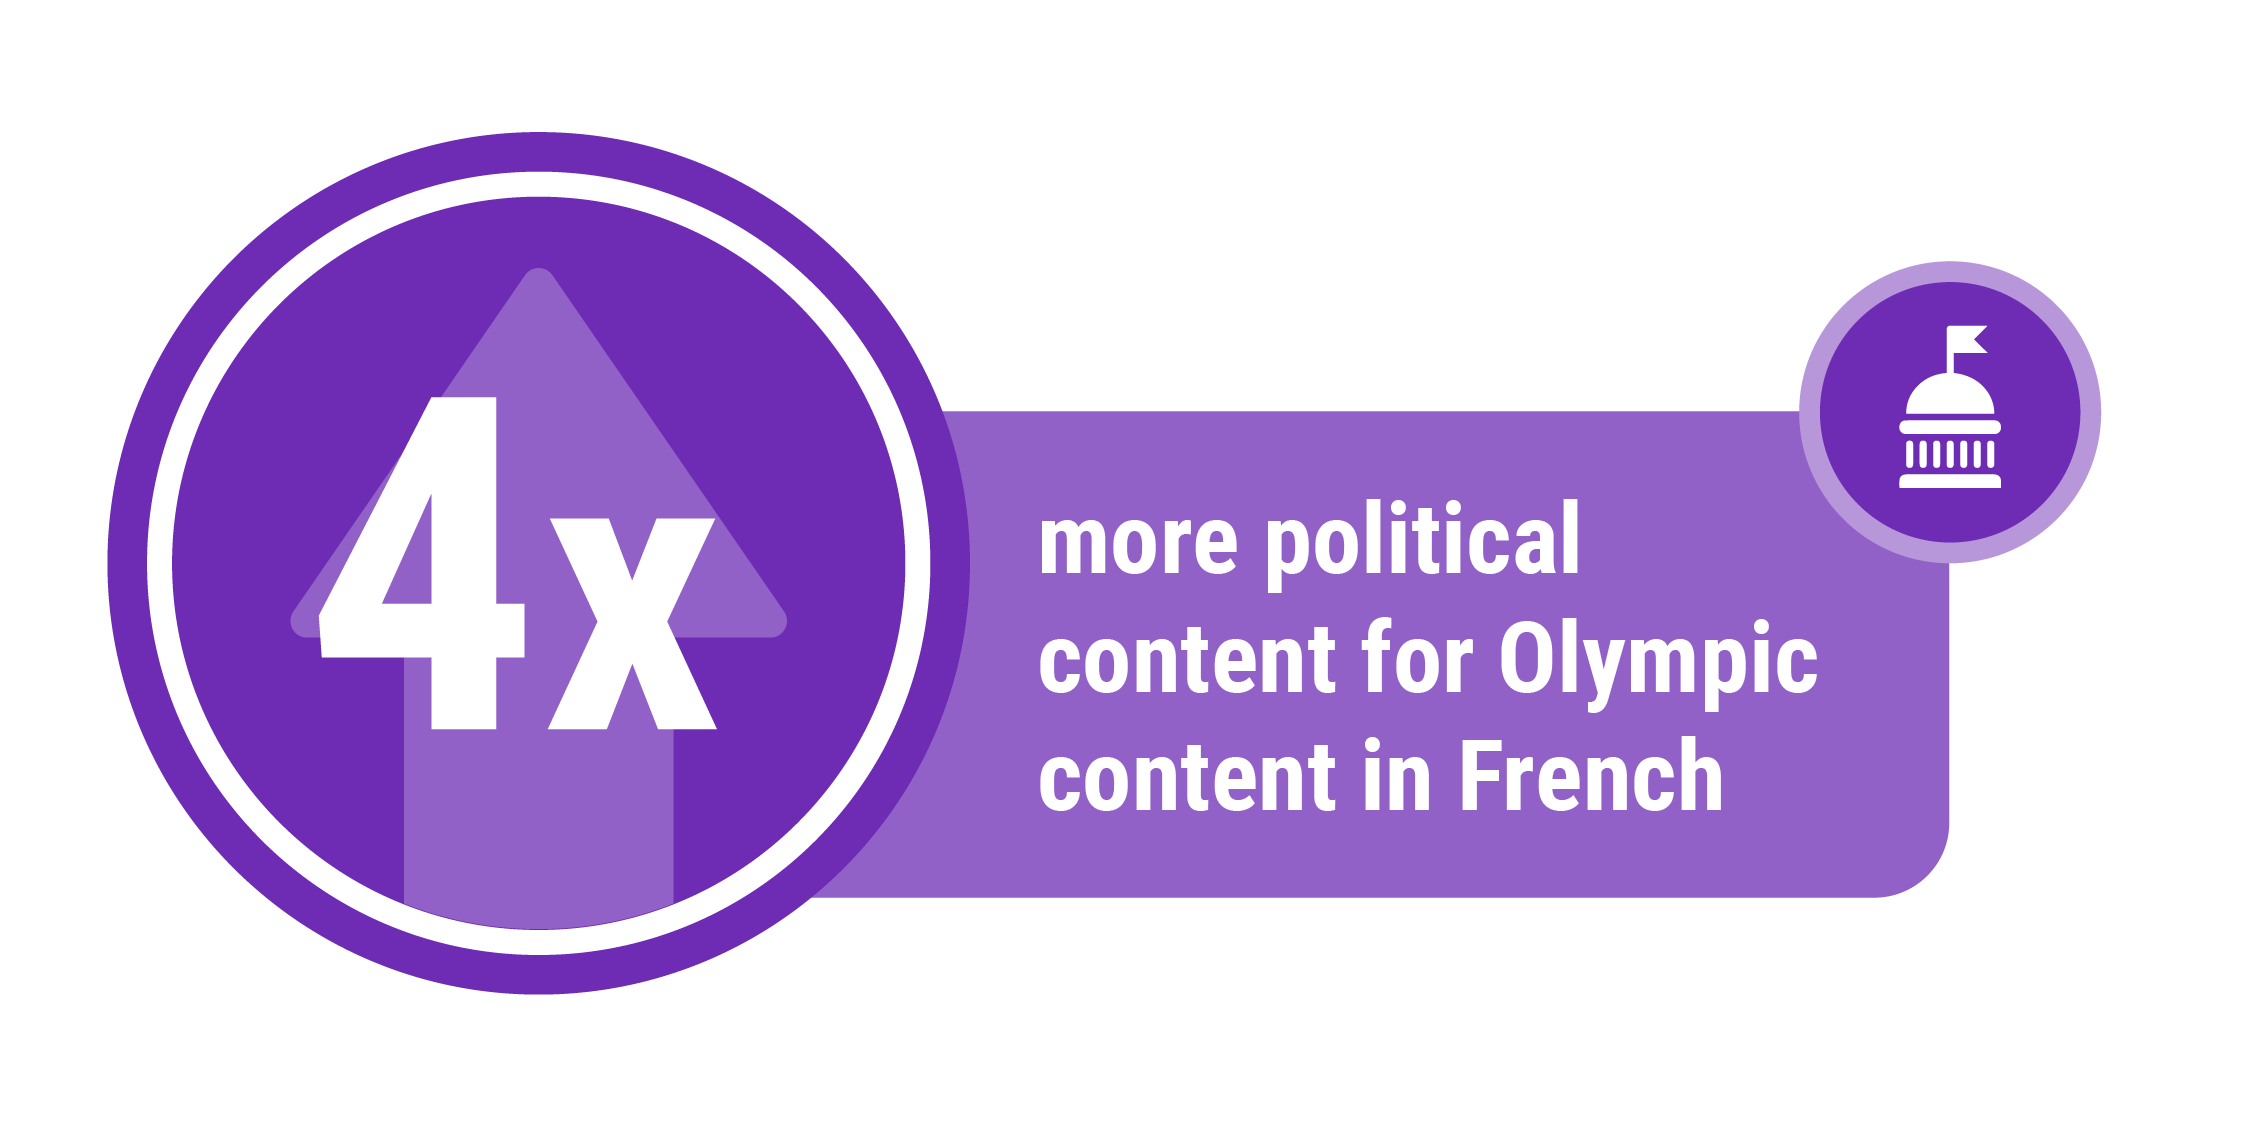 Simple data visualization in the color purple saying that there was four times more political content for Olympic content in French